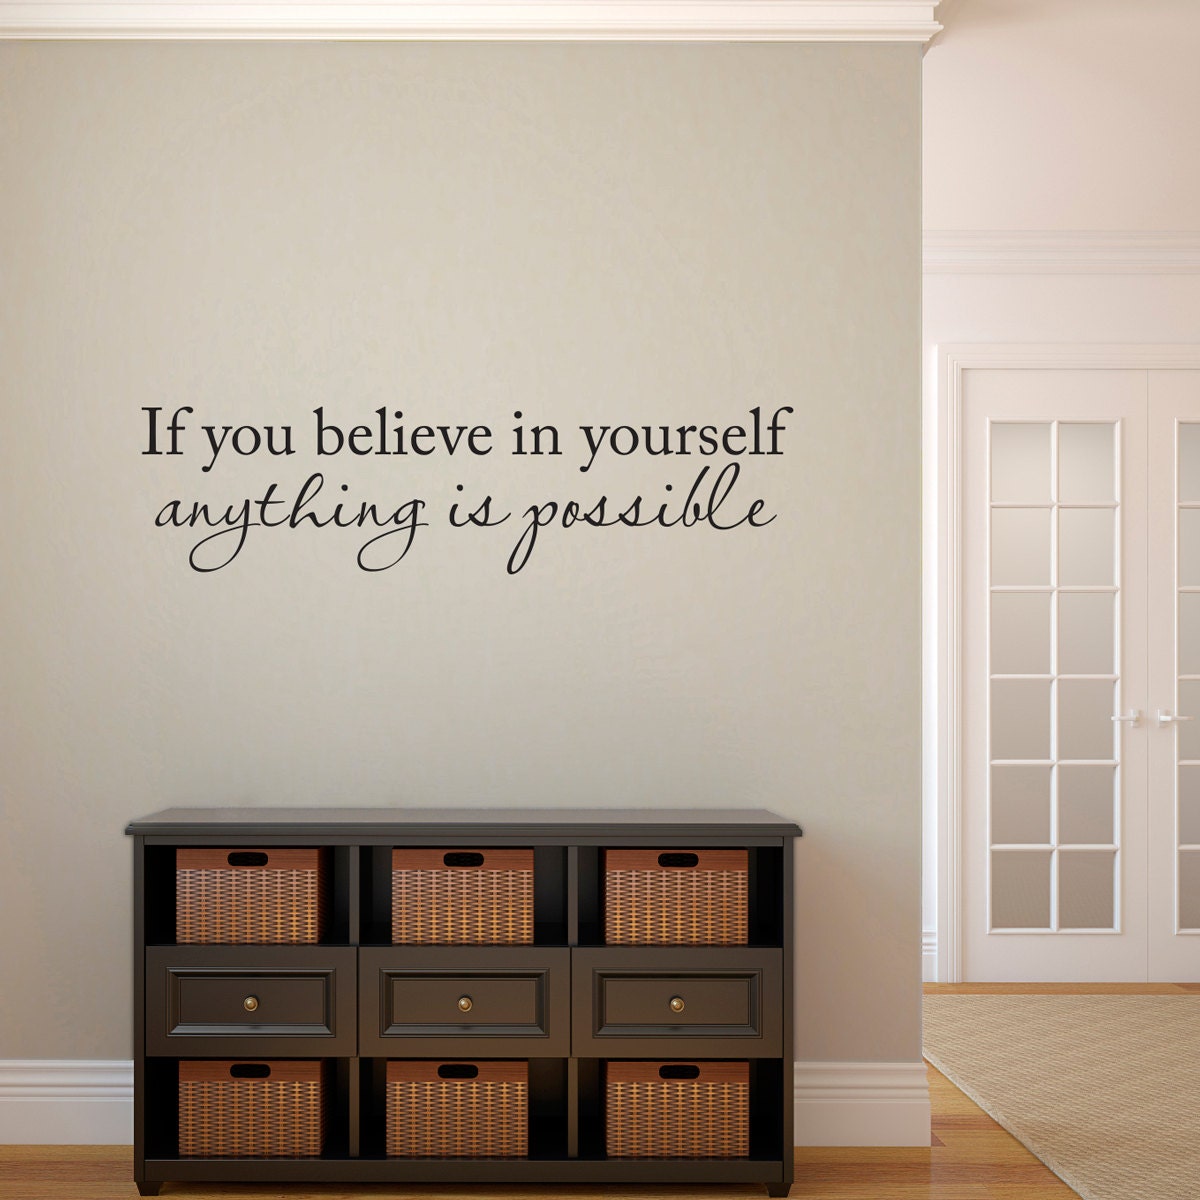 If you Believe in Yourself anything is Possible Decal | Inspirational Vinyl Quote | Dorm Room or Office Wall Decal